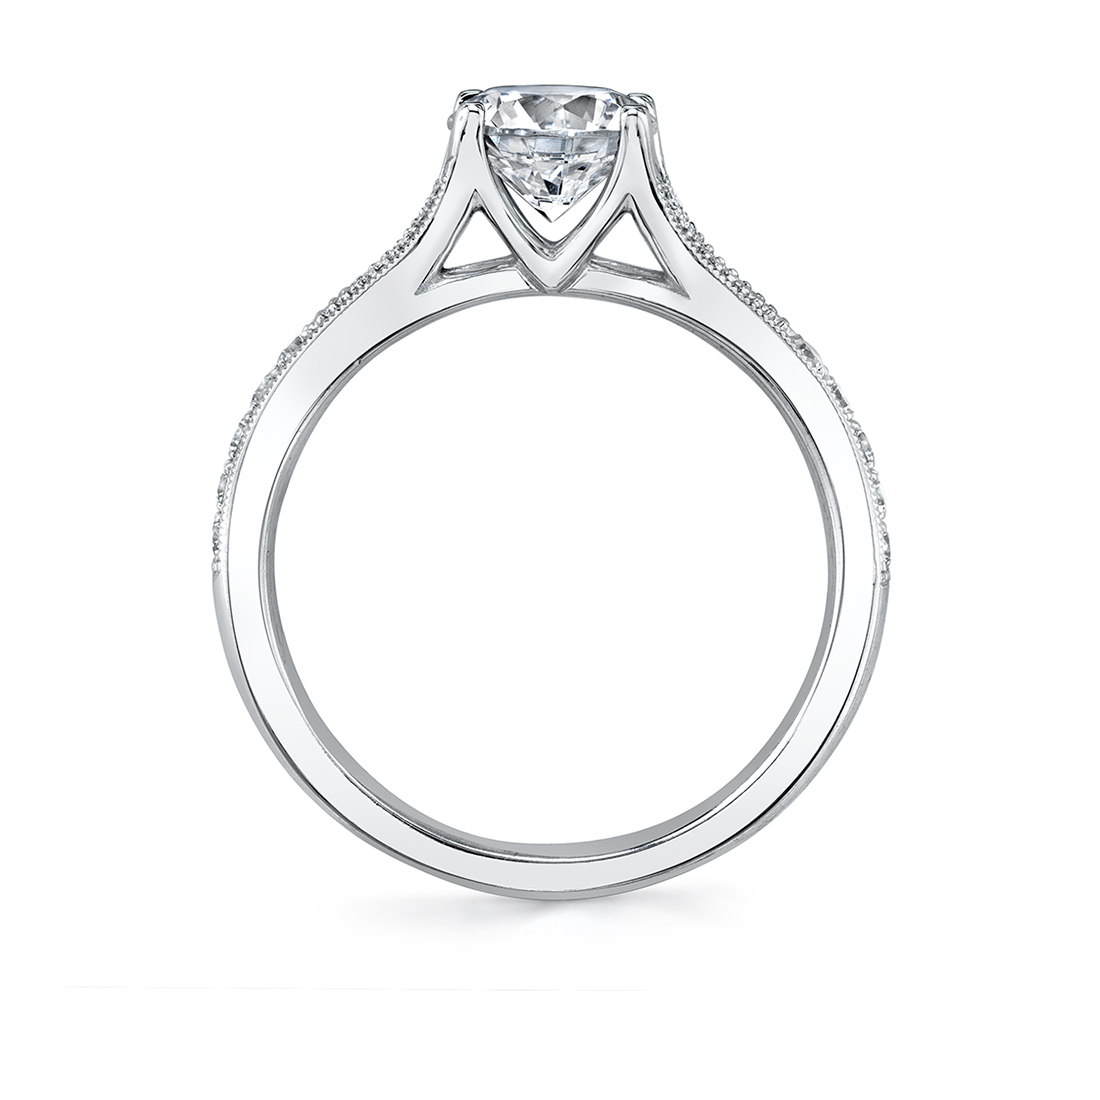 Side View of a Unique Engagement Ring - Cherish